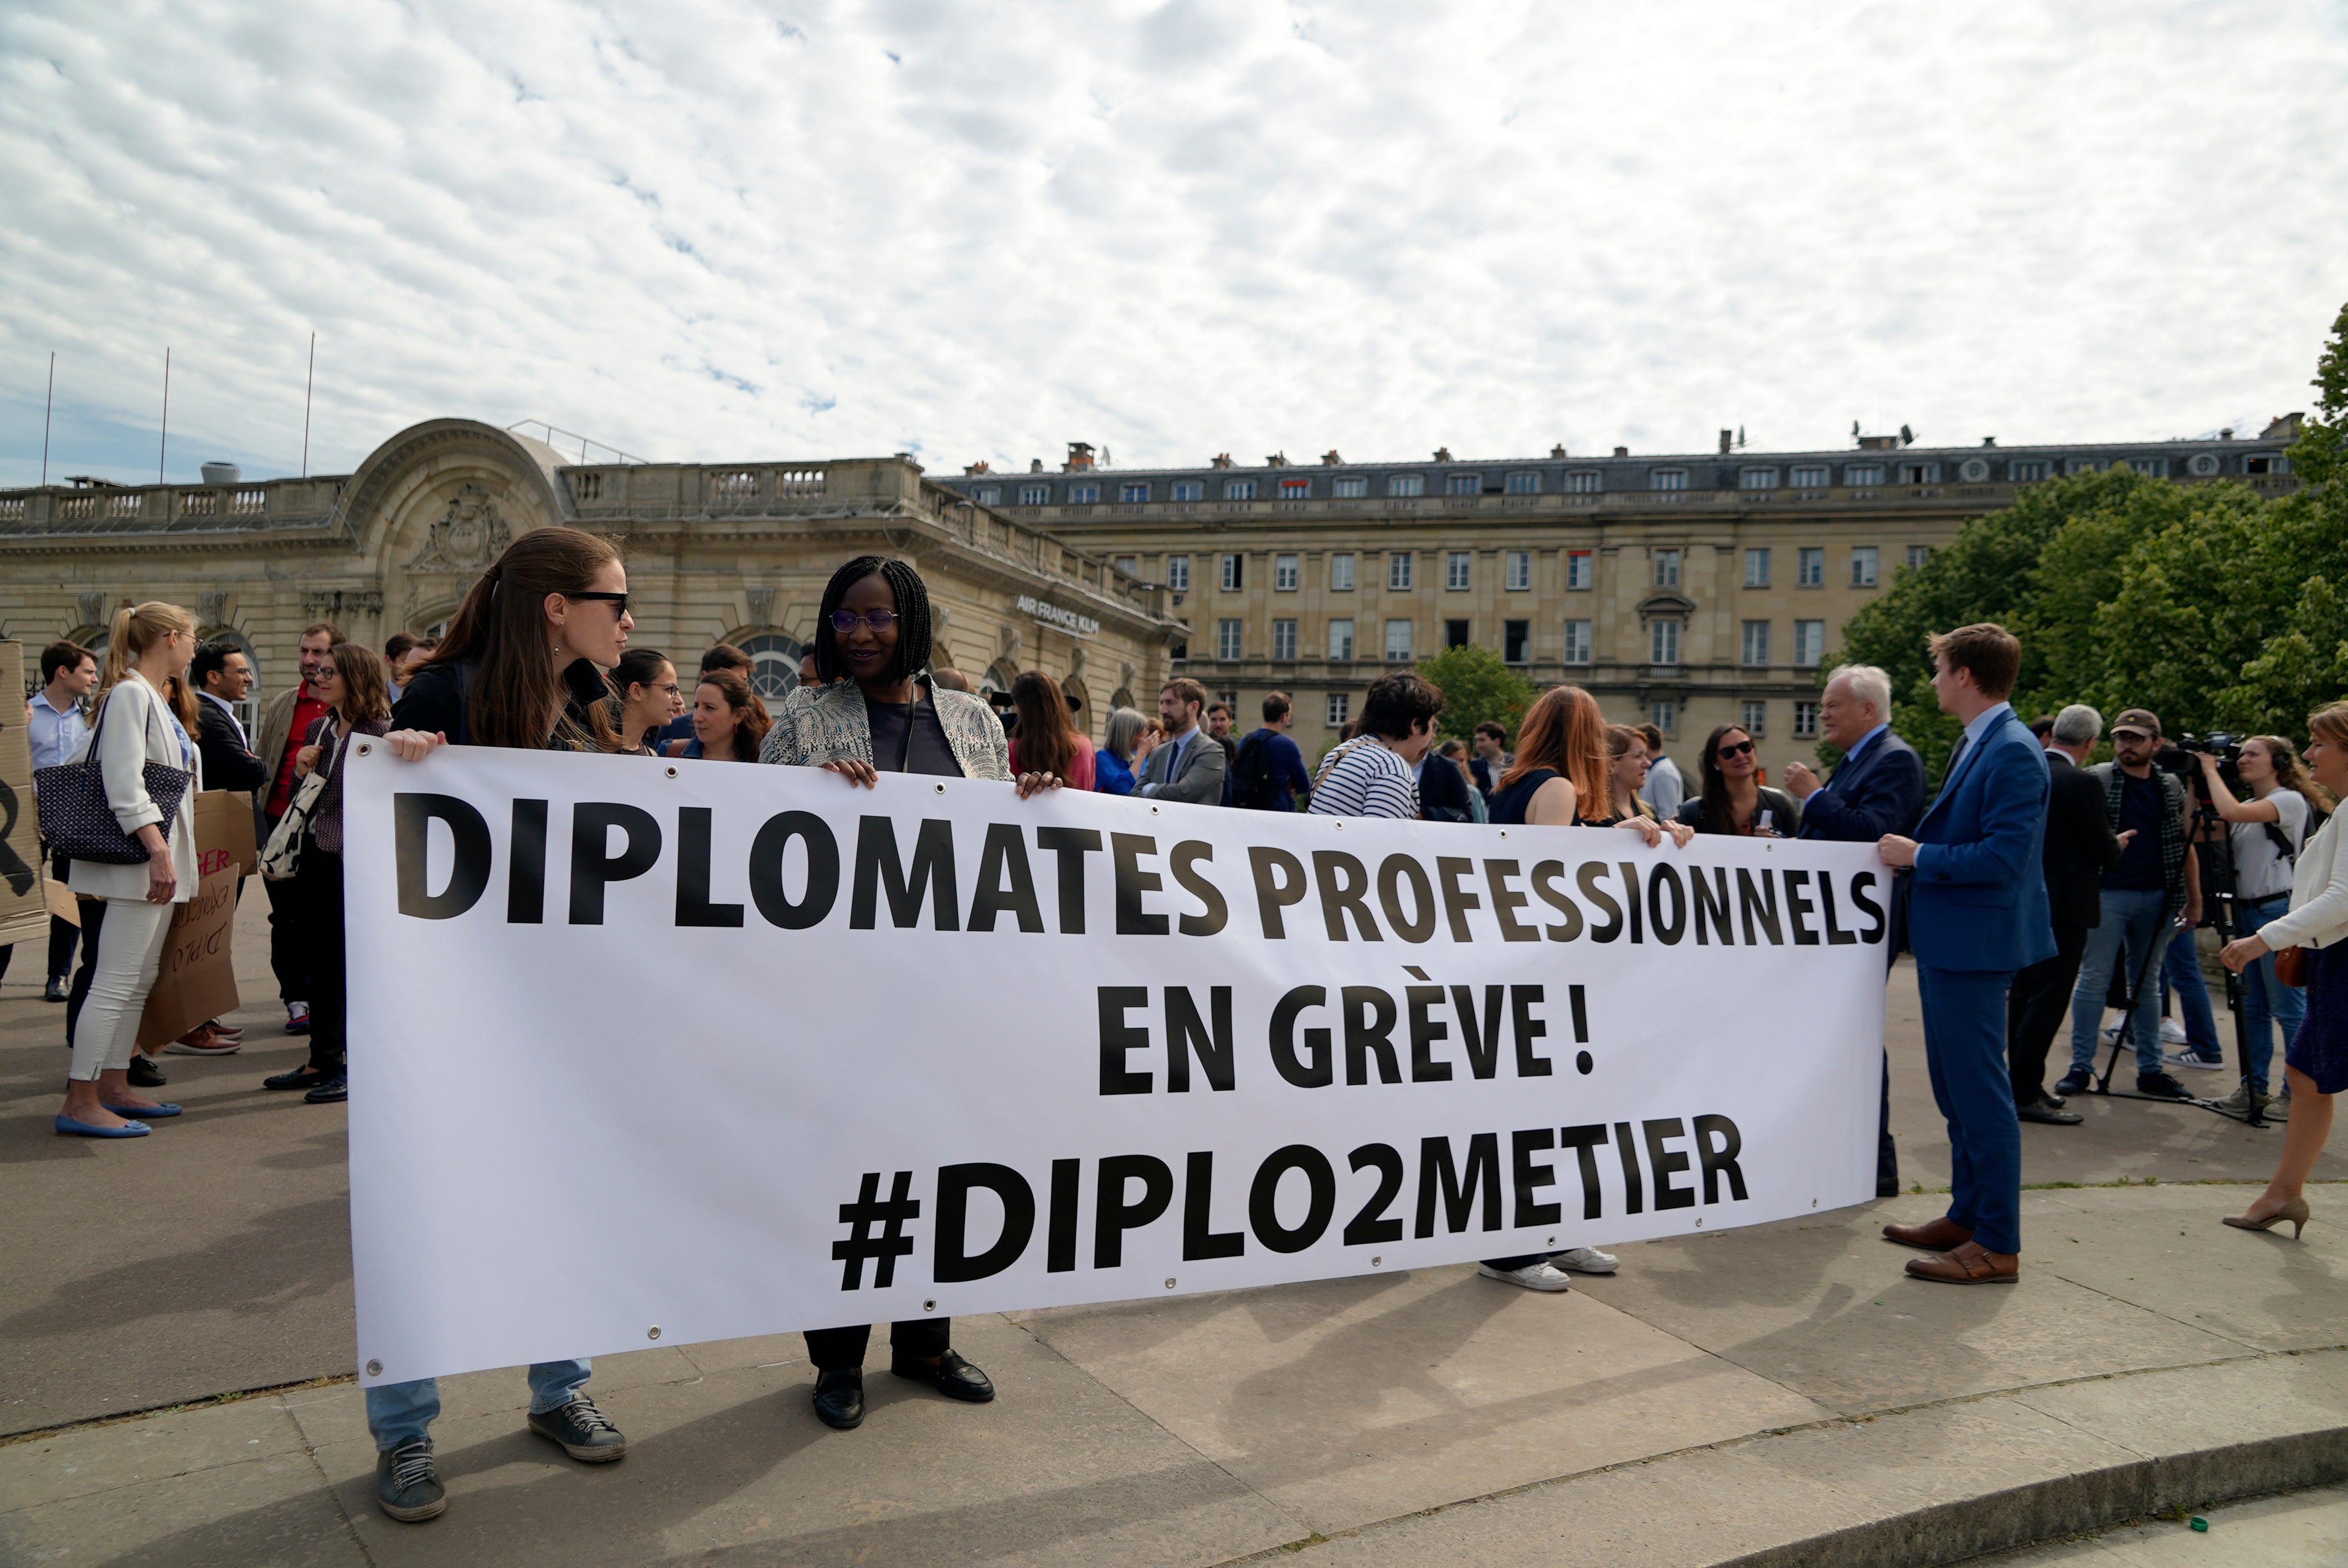 Diplomats hold a banner reading “Professional diplomats on strike” during a protest near the French Foreign Ministry in Paris